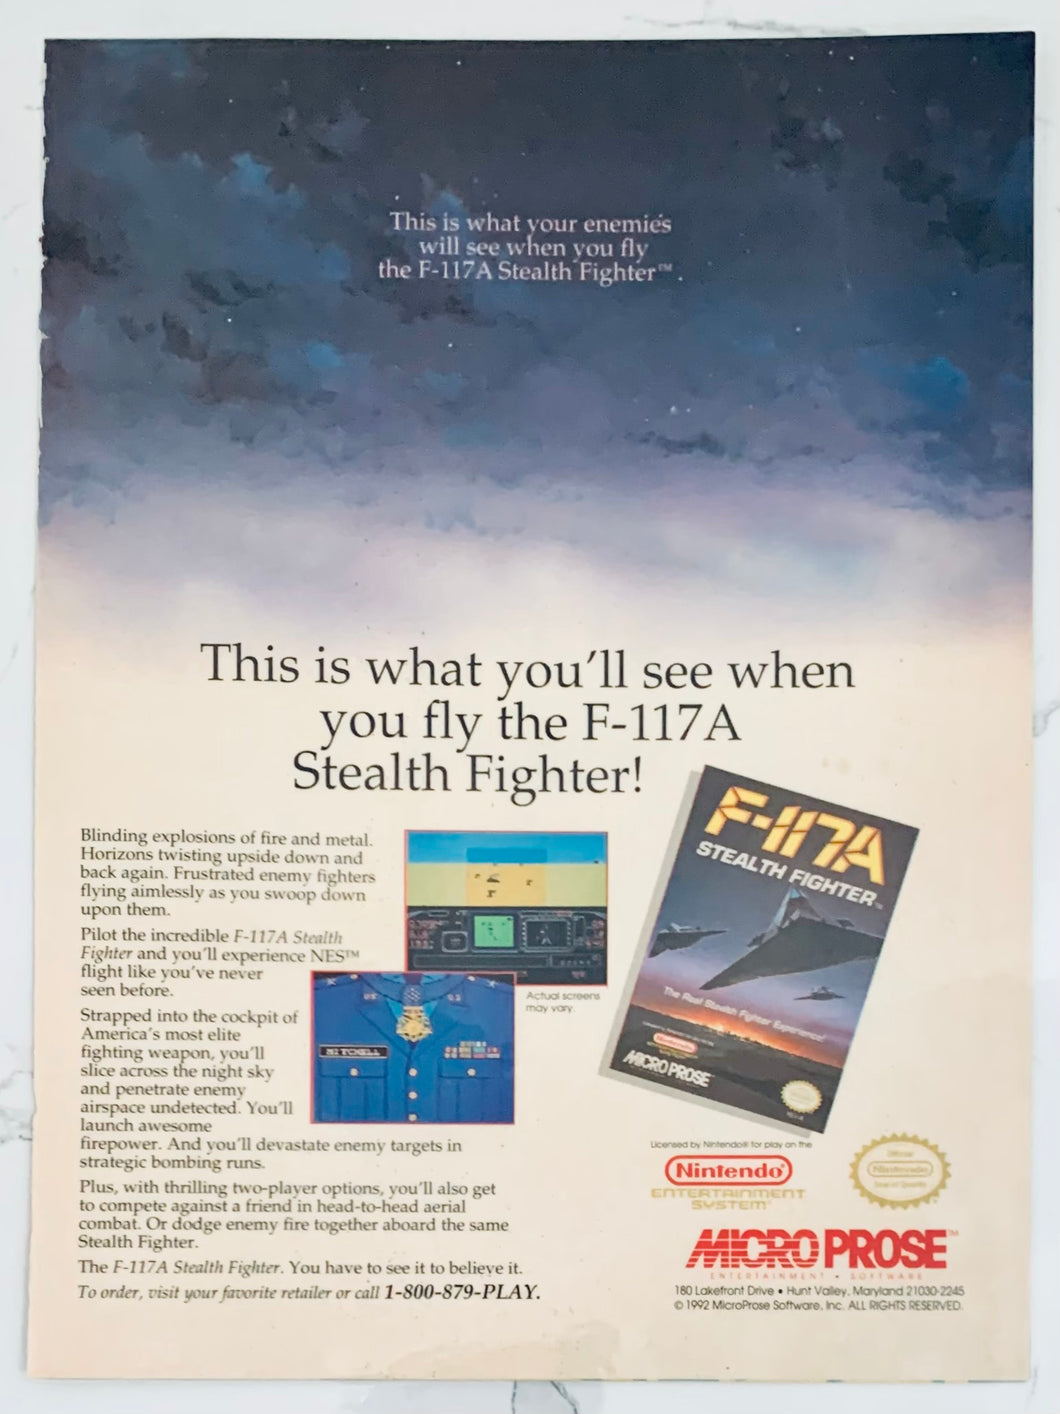 F-117A: Stealth Fighter - NES - Original Vintage Advertisement - Print Ads - Laminated A4 Poster